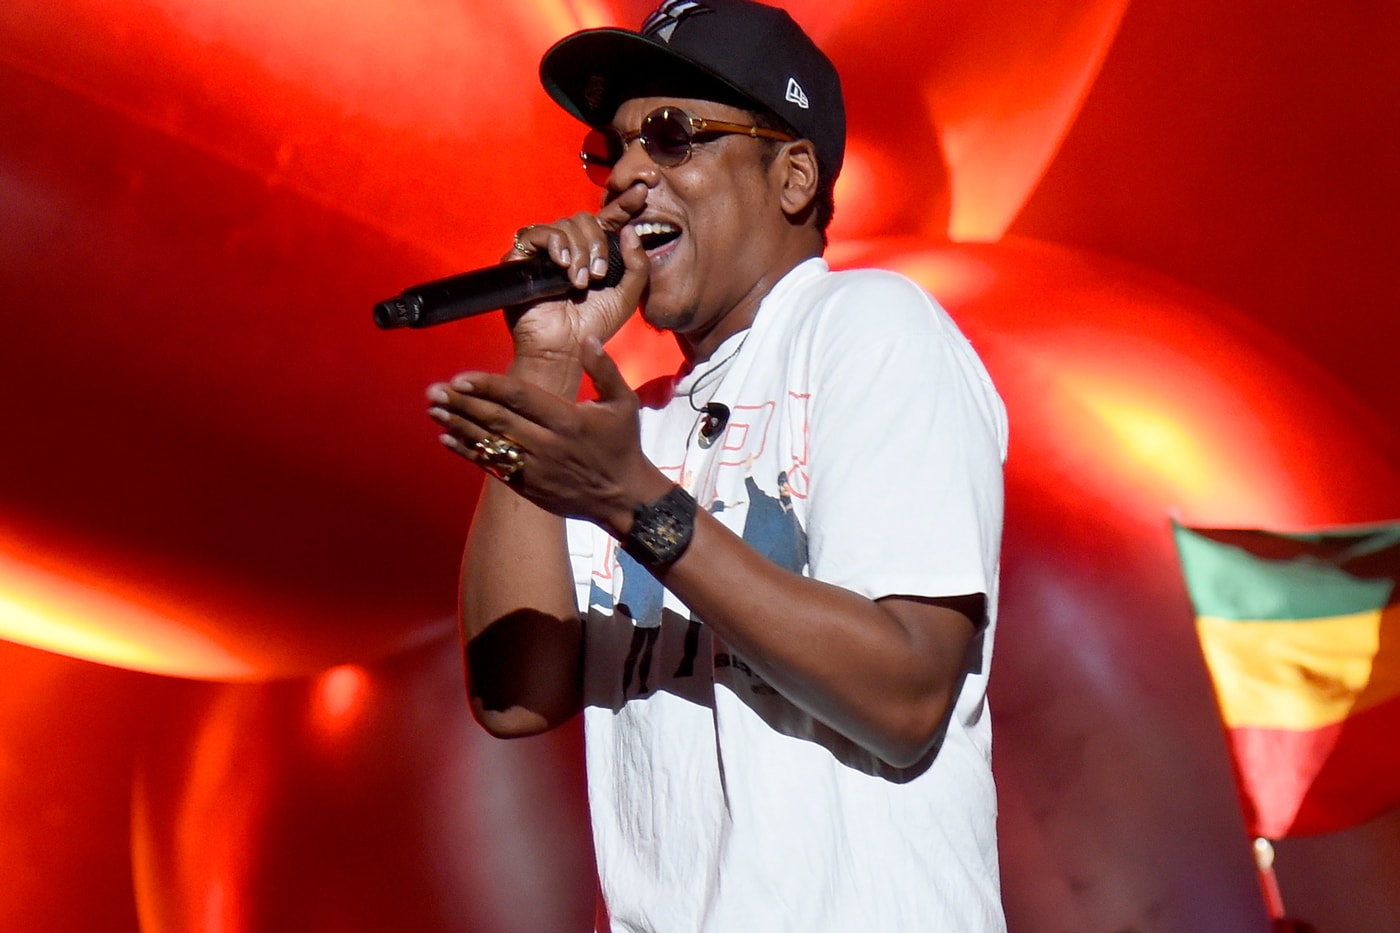 JAY-Z ‘Footnotes For ‘The Story Of O.J” Kendrick Lamar, Will Smith & Chris Rock